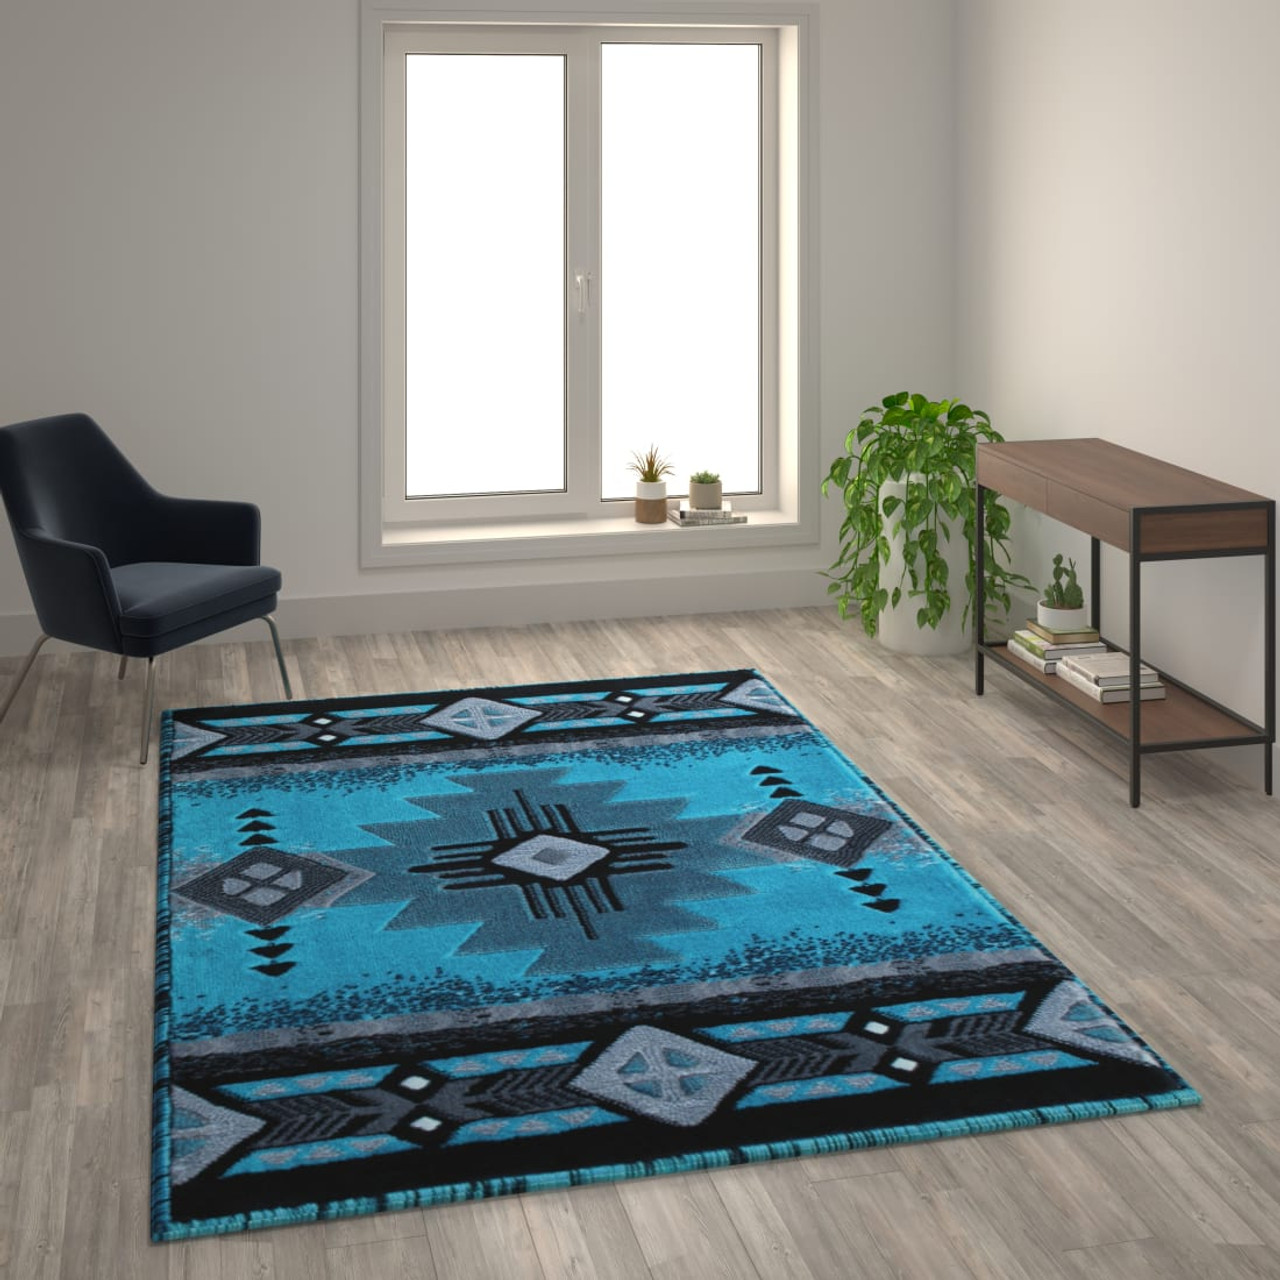 Buy Mohave 6' x 9' Turquoise Area Rug | Conn's HomePlus